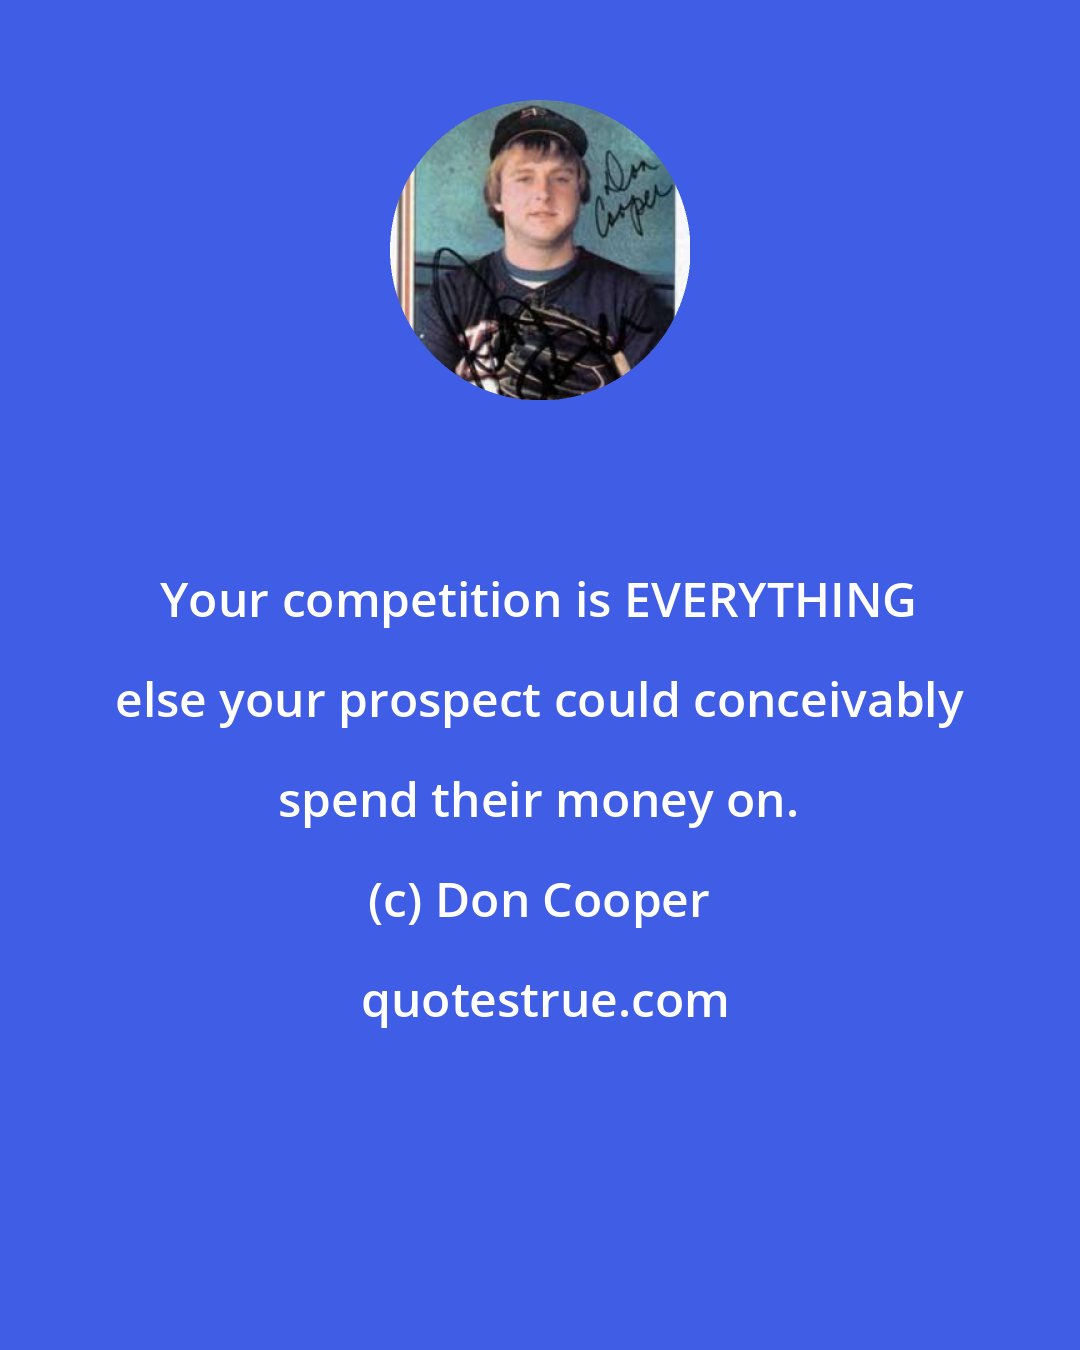 Don Cooper: Your competition is EVERYTHING else your prospect could conceivably spend their money on.